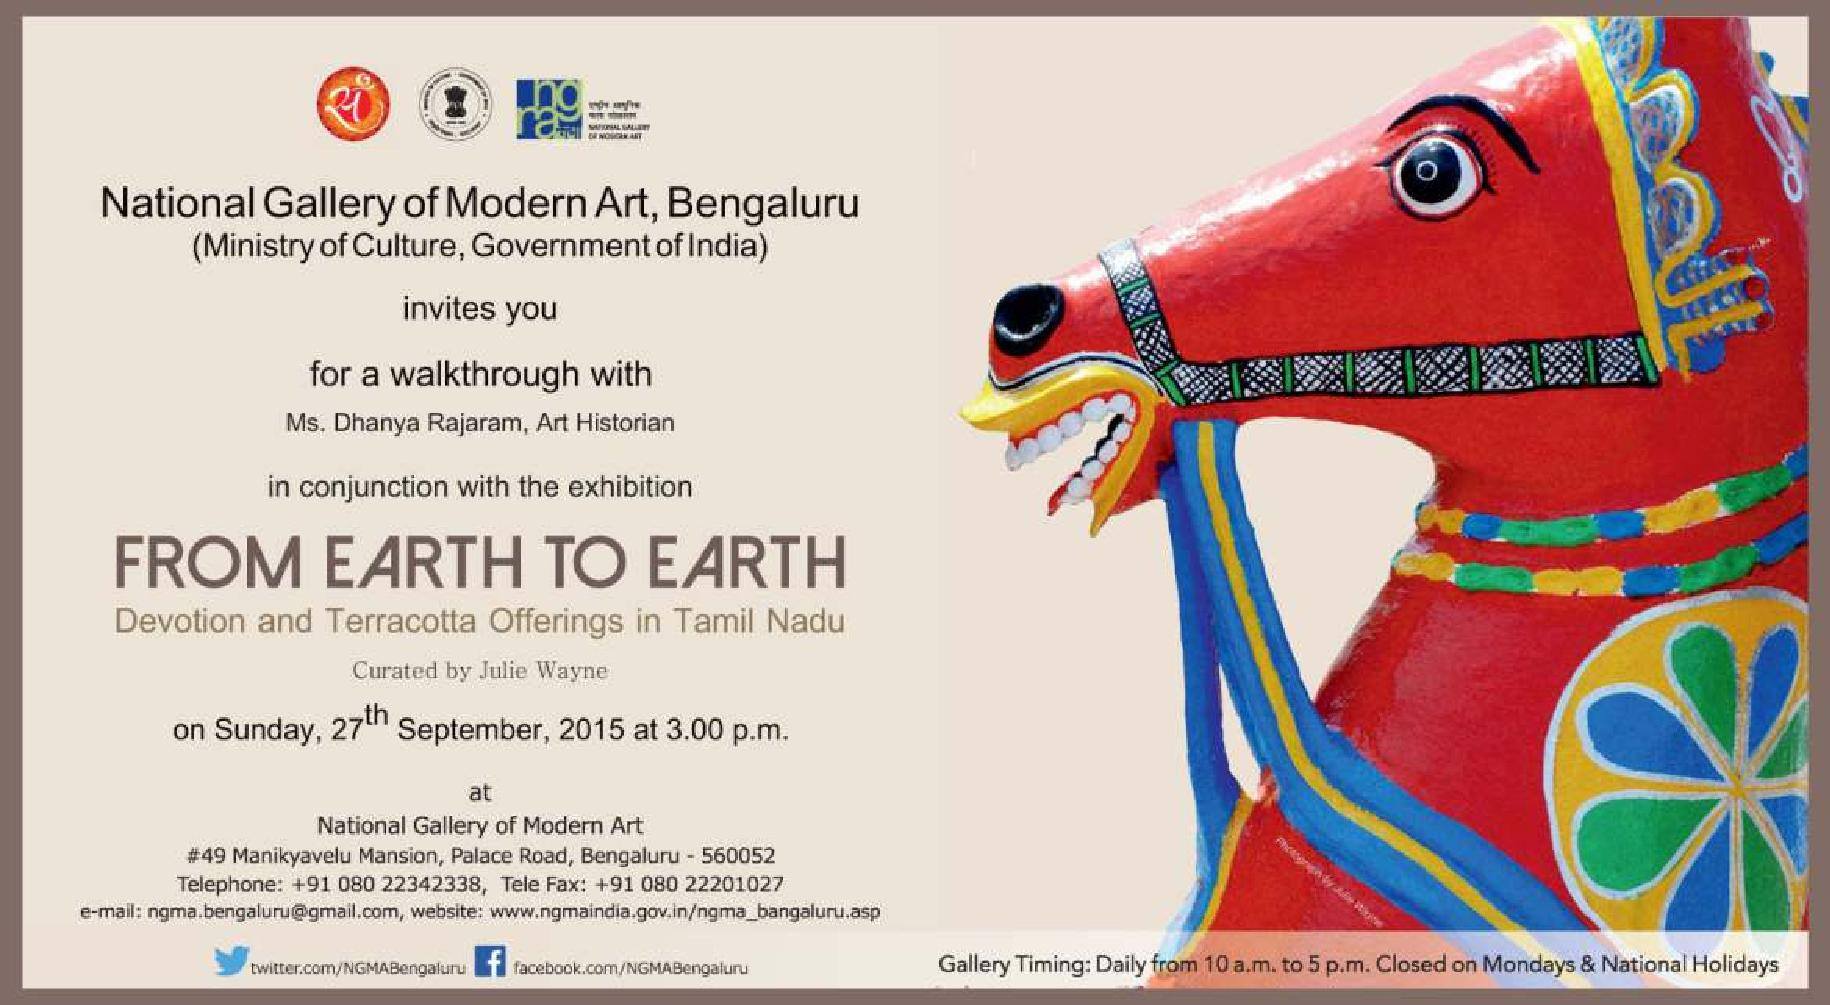 https://whatshappbangalore.files.wordpress.com/2015/09/walkthrough-with-ms-dhanya-rajaram-in-conjunction-with-the-exhibition-of-from-earth-to-earth-at-ngma-bengaluru.jpg